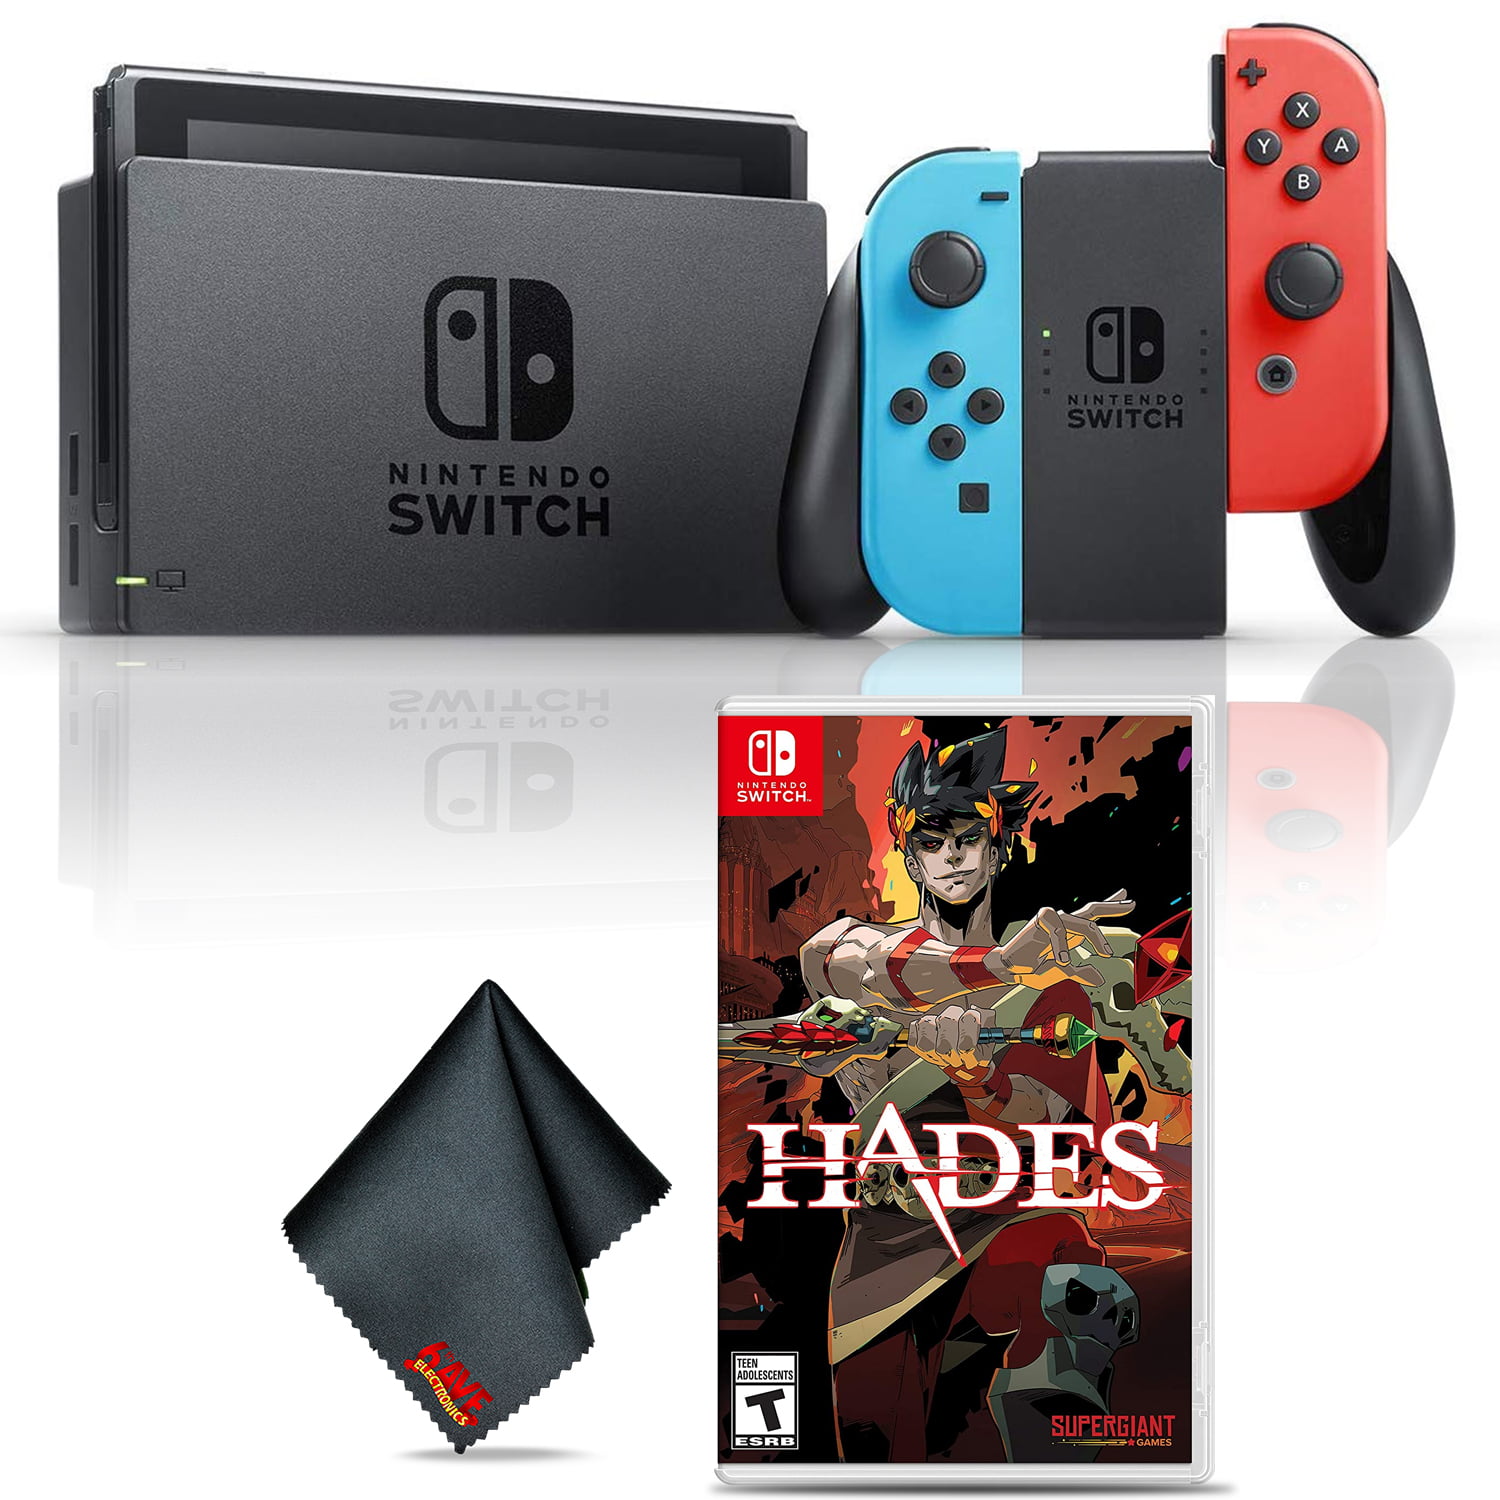 Nintendo Switch (Neon Blue/Red) Gaming Console Bundle with Hades Game and  Cleaning Cloth